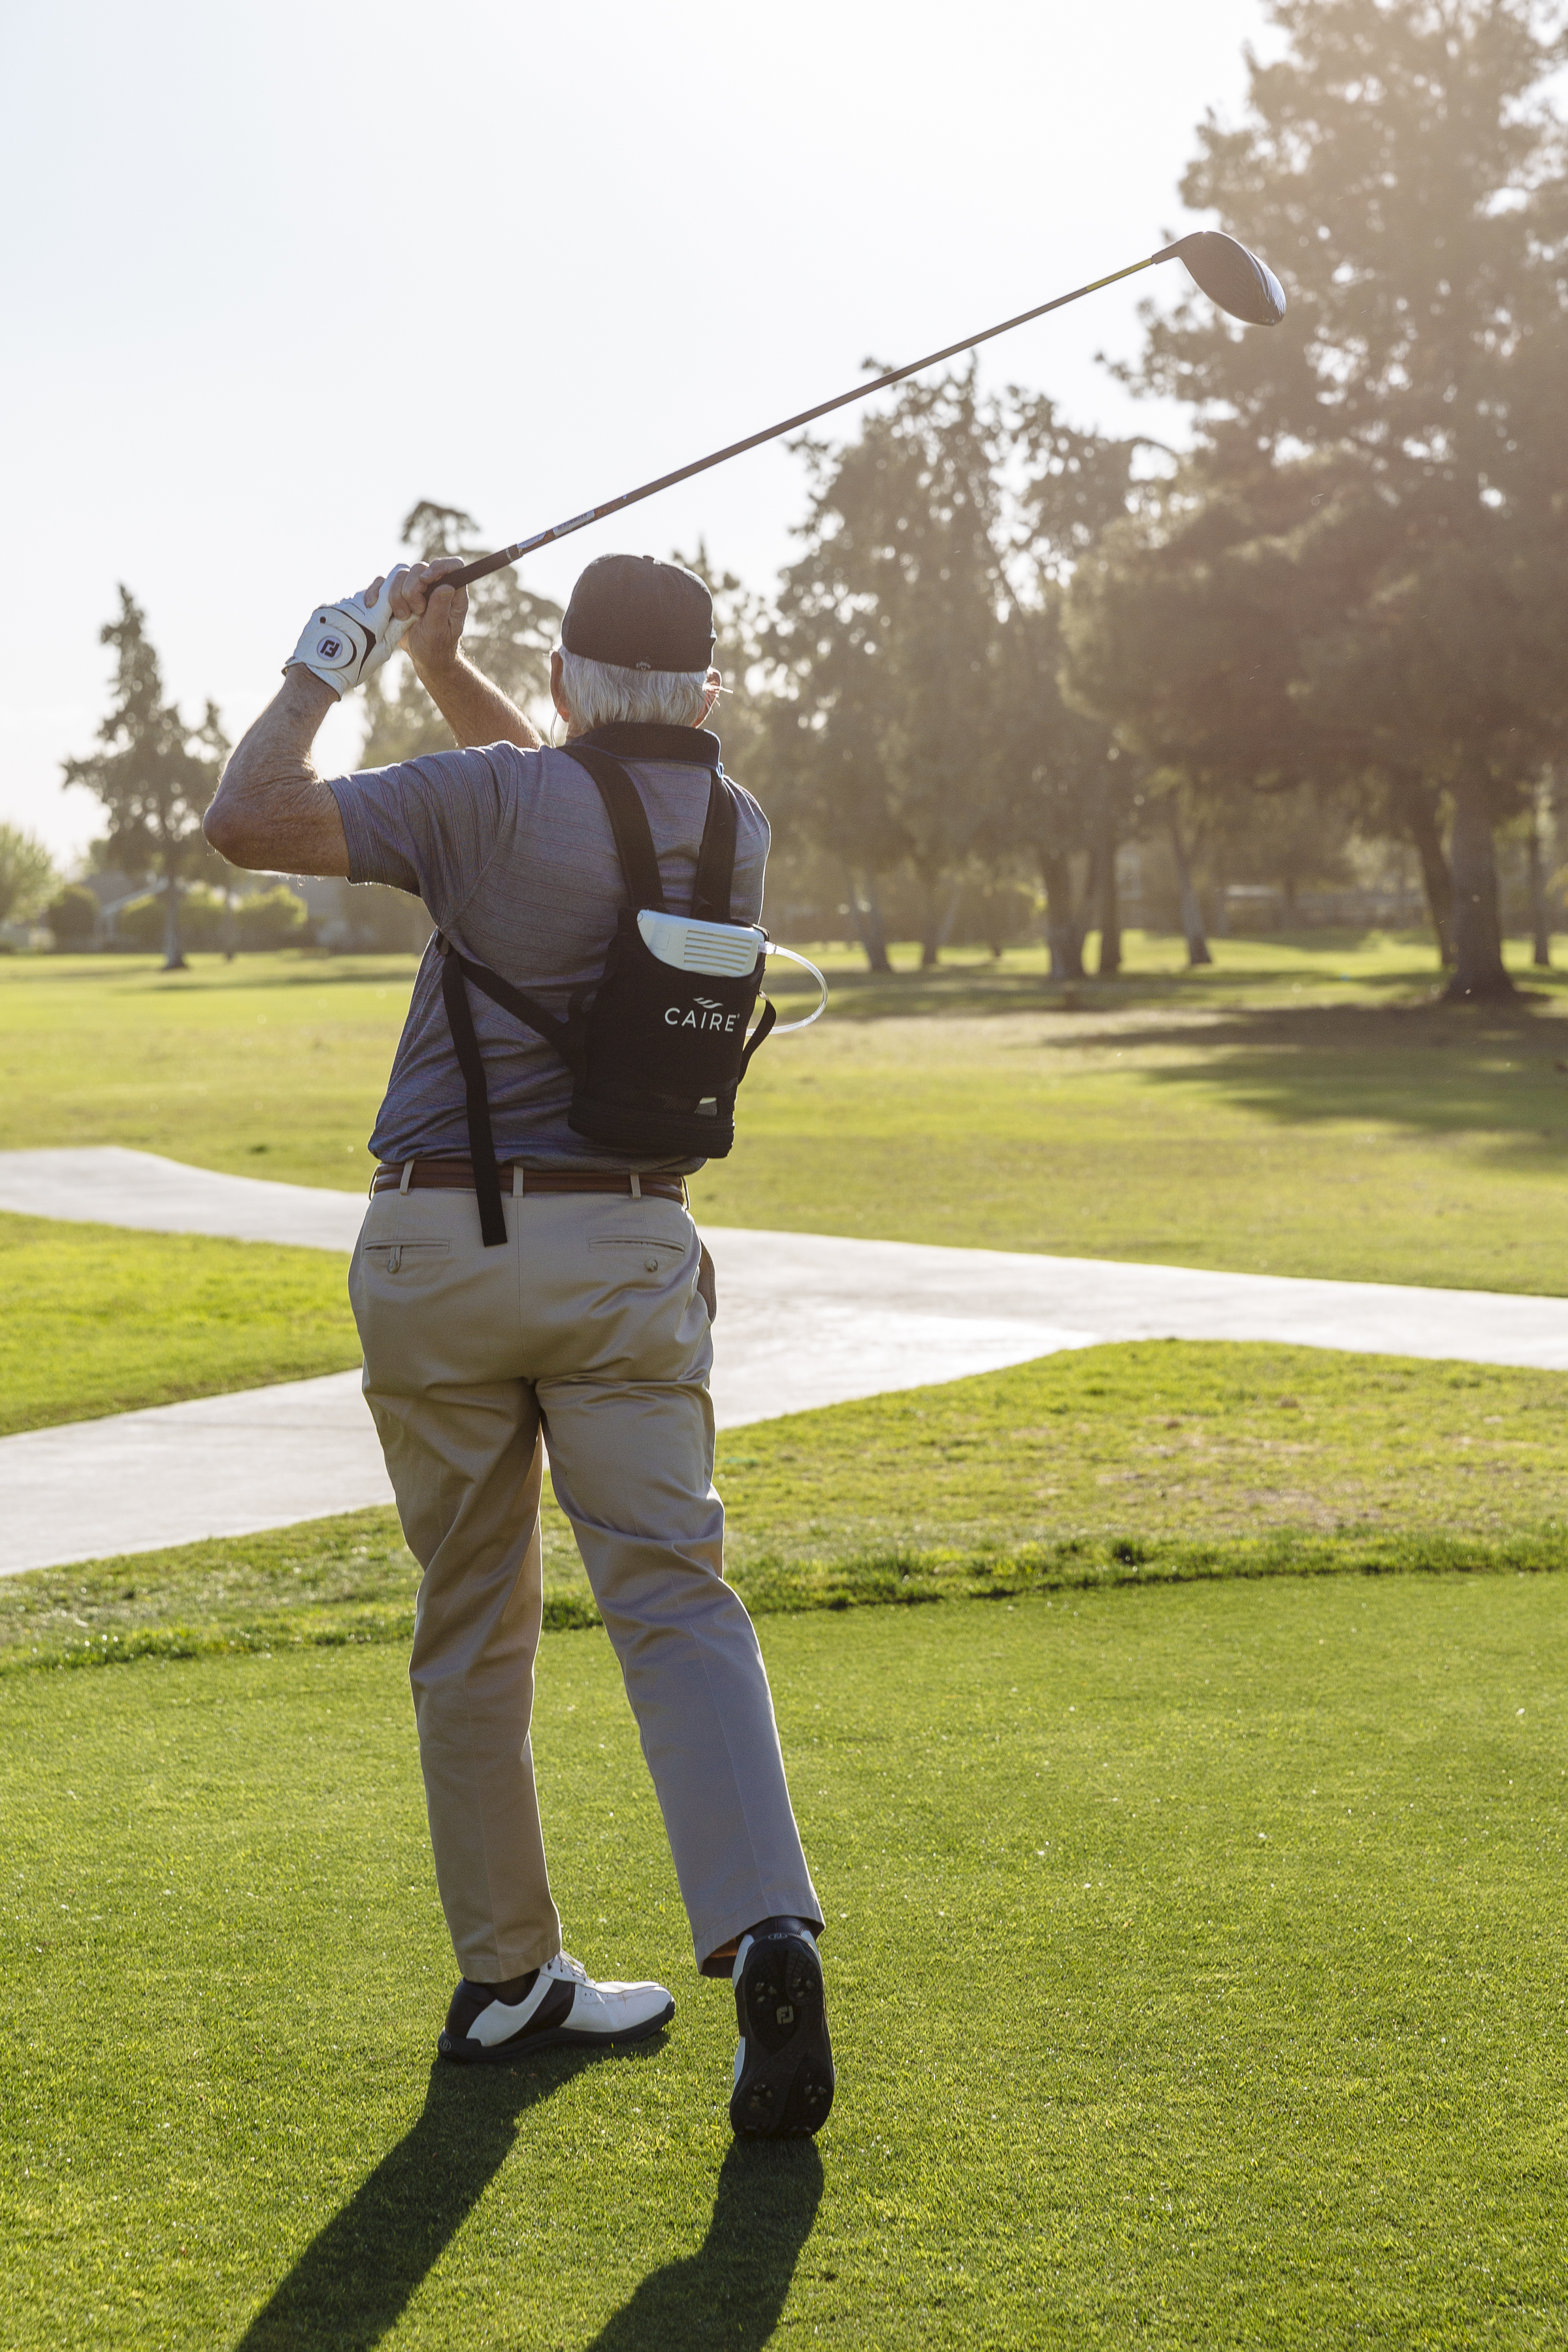 Golfing with the Caire FreeStyle Comfort.